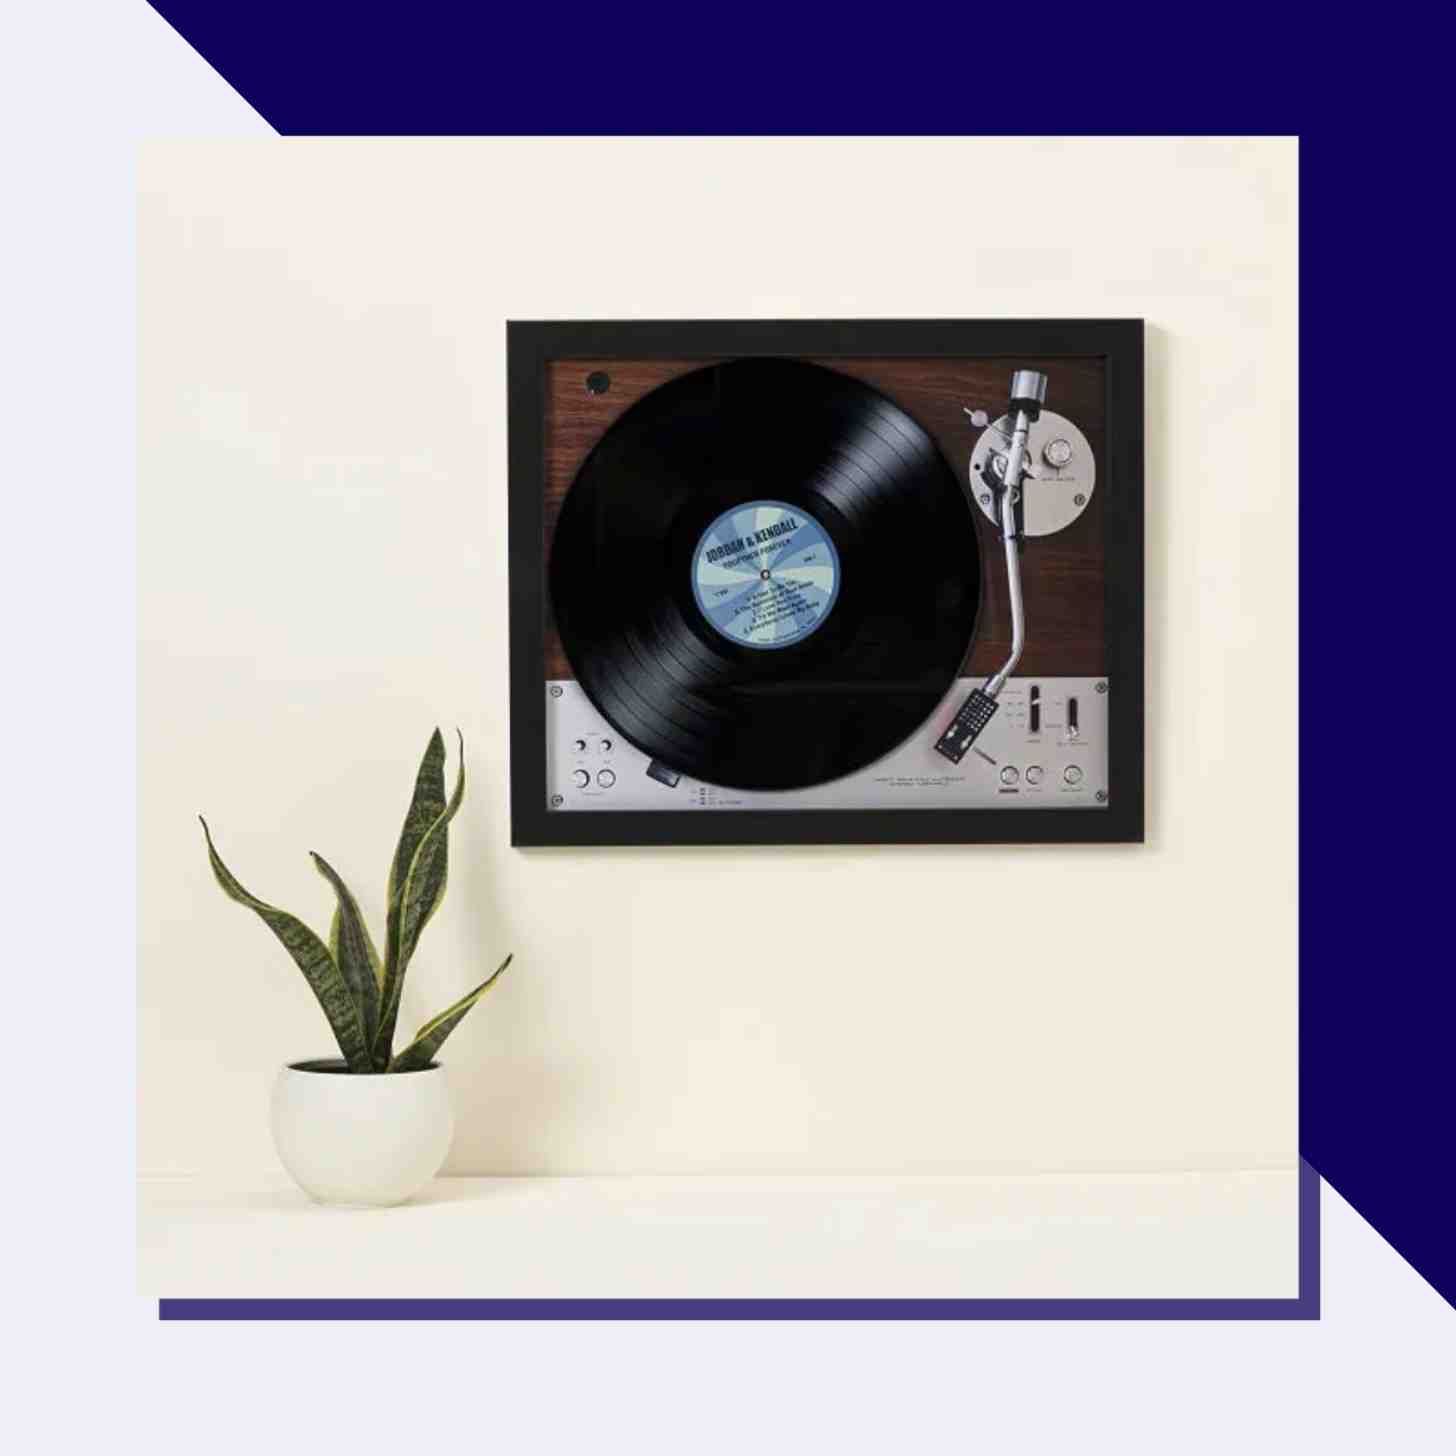 A Real Upcycled Vinyl Artwork Hanged On A Wall